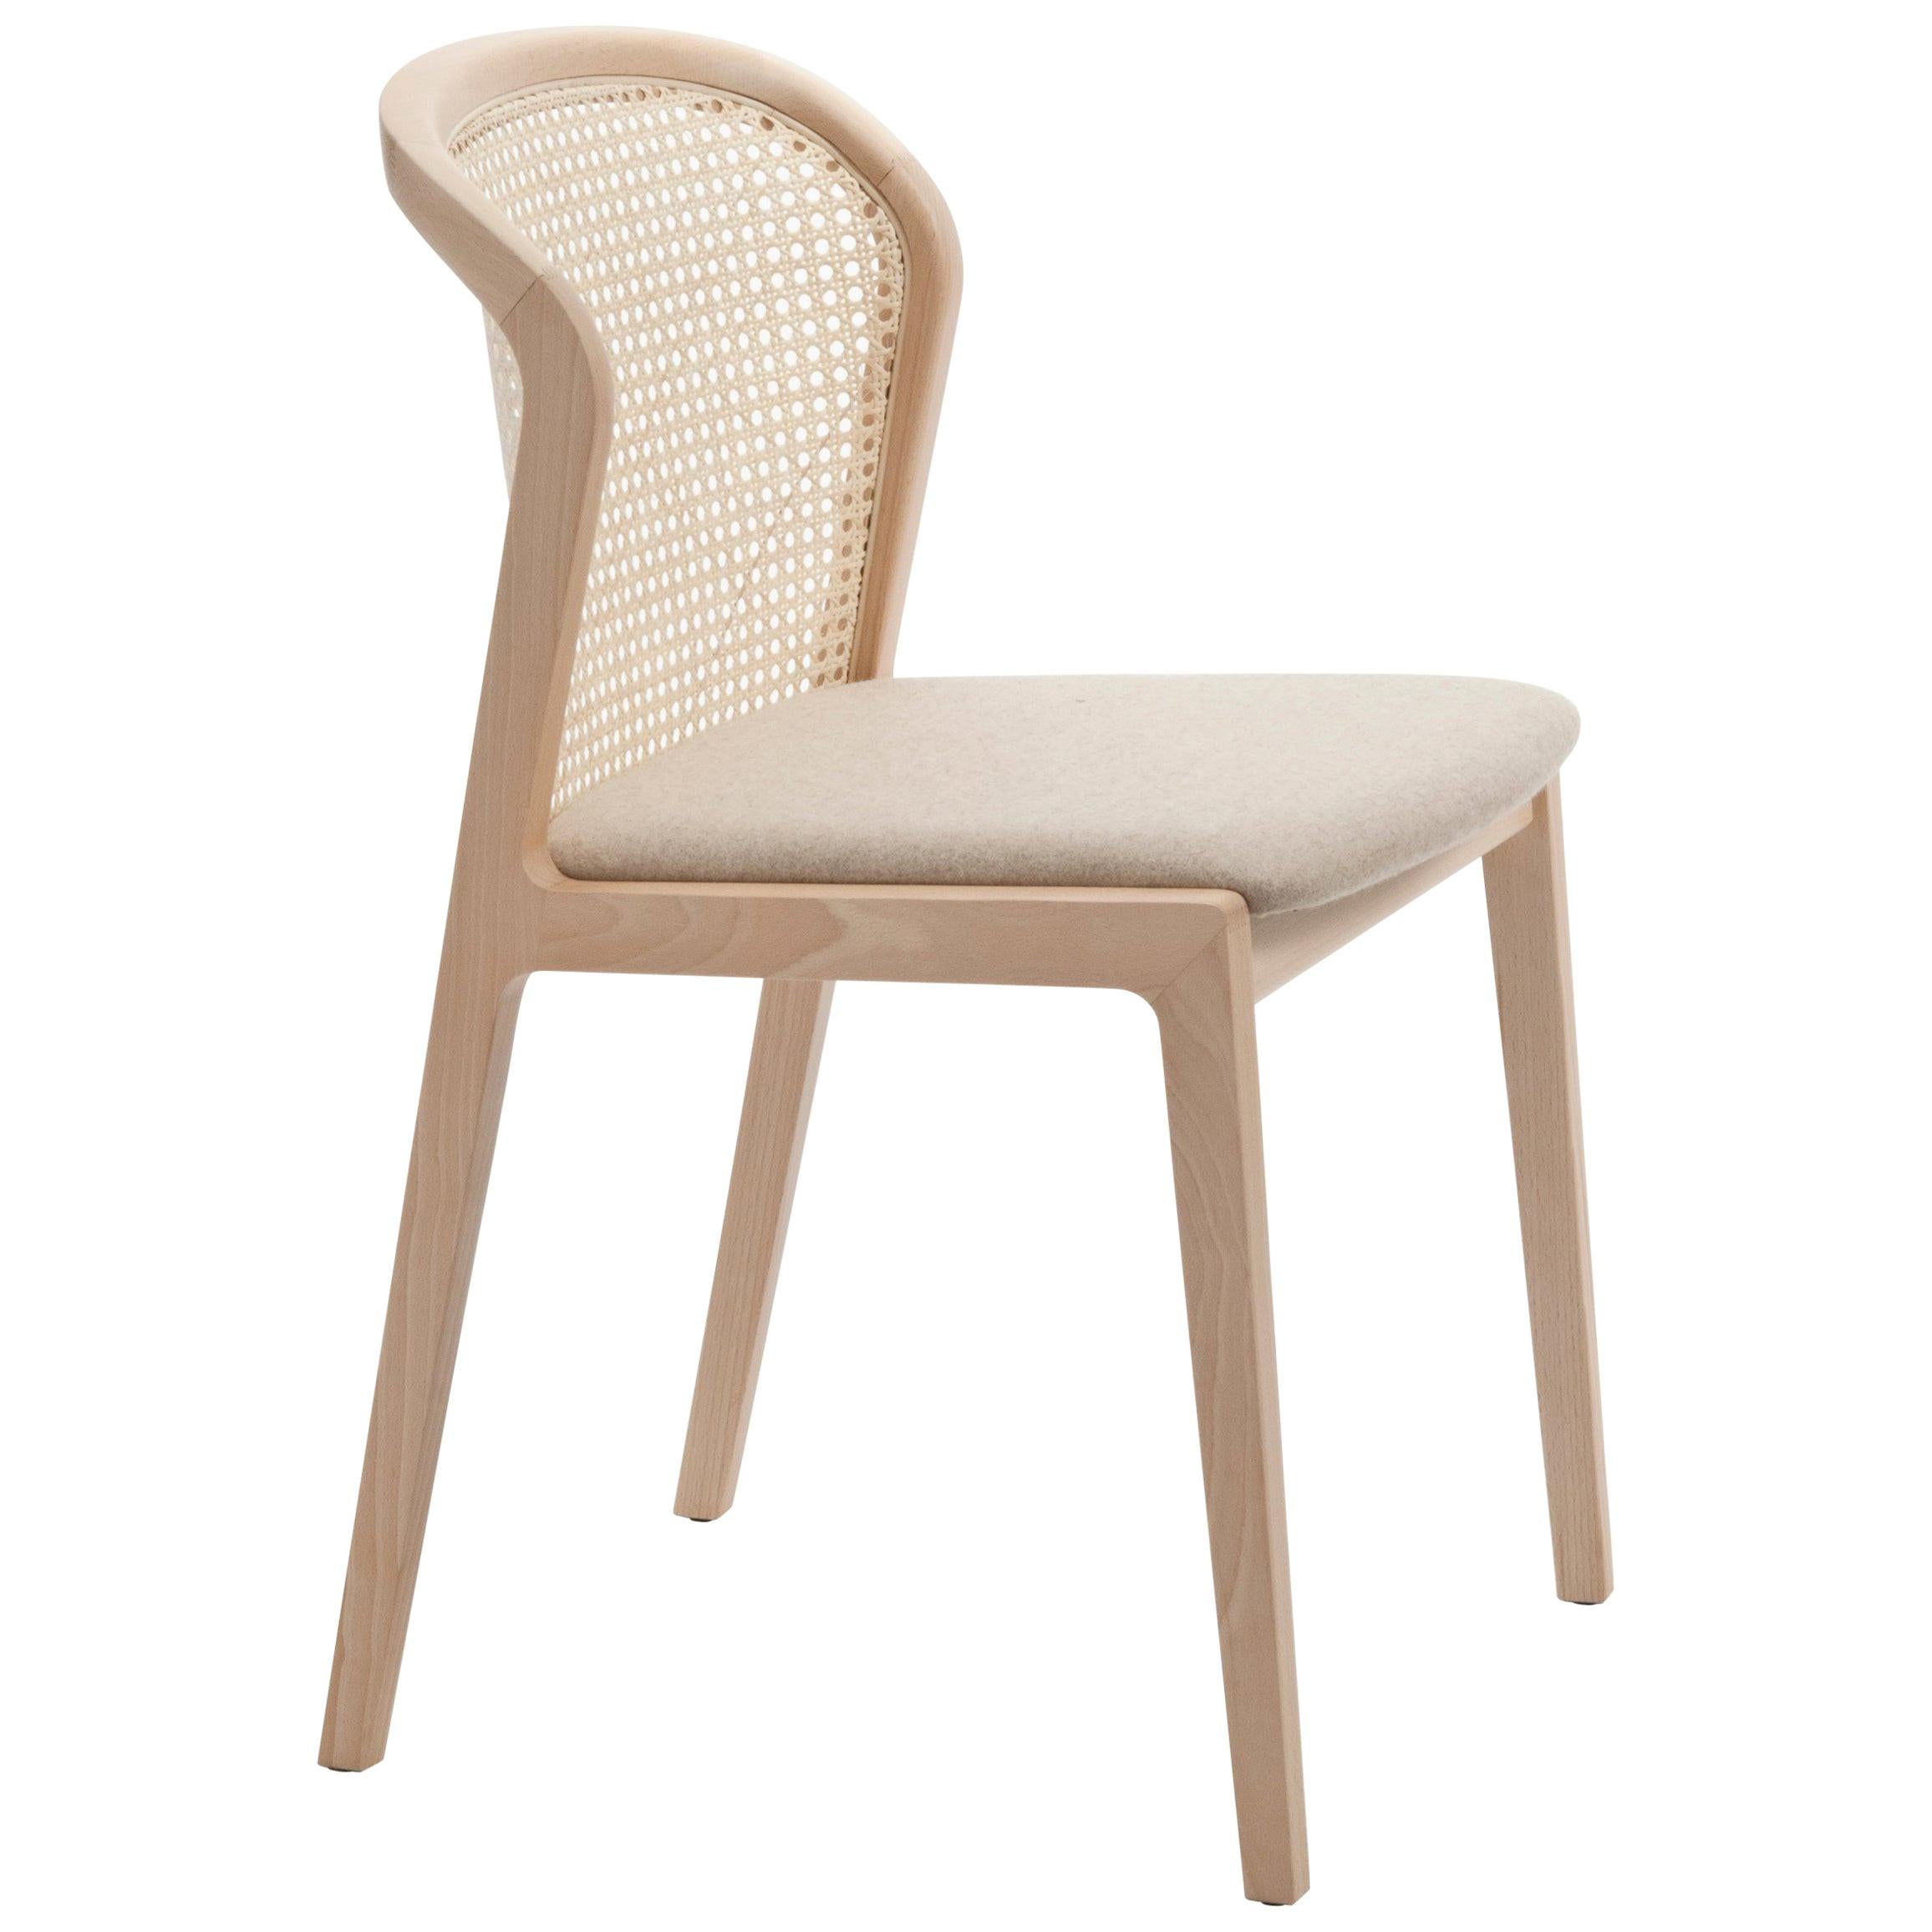 Vienna Chair, in Beach Wood and Straw, Beige Full Grain Leather Padded Seat For Sale